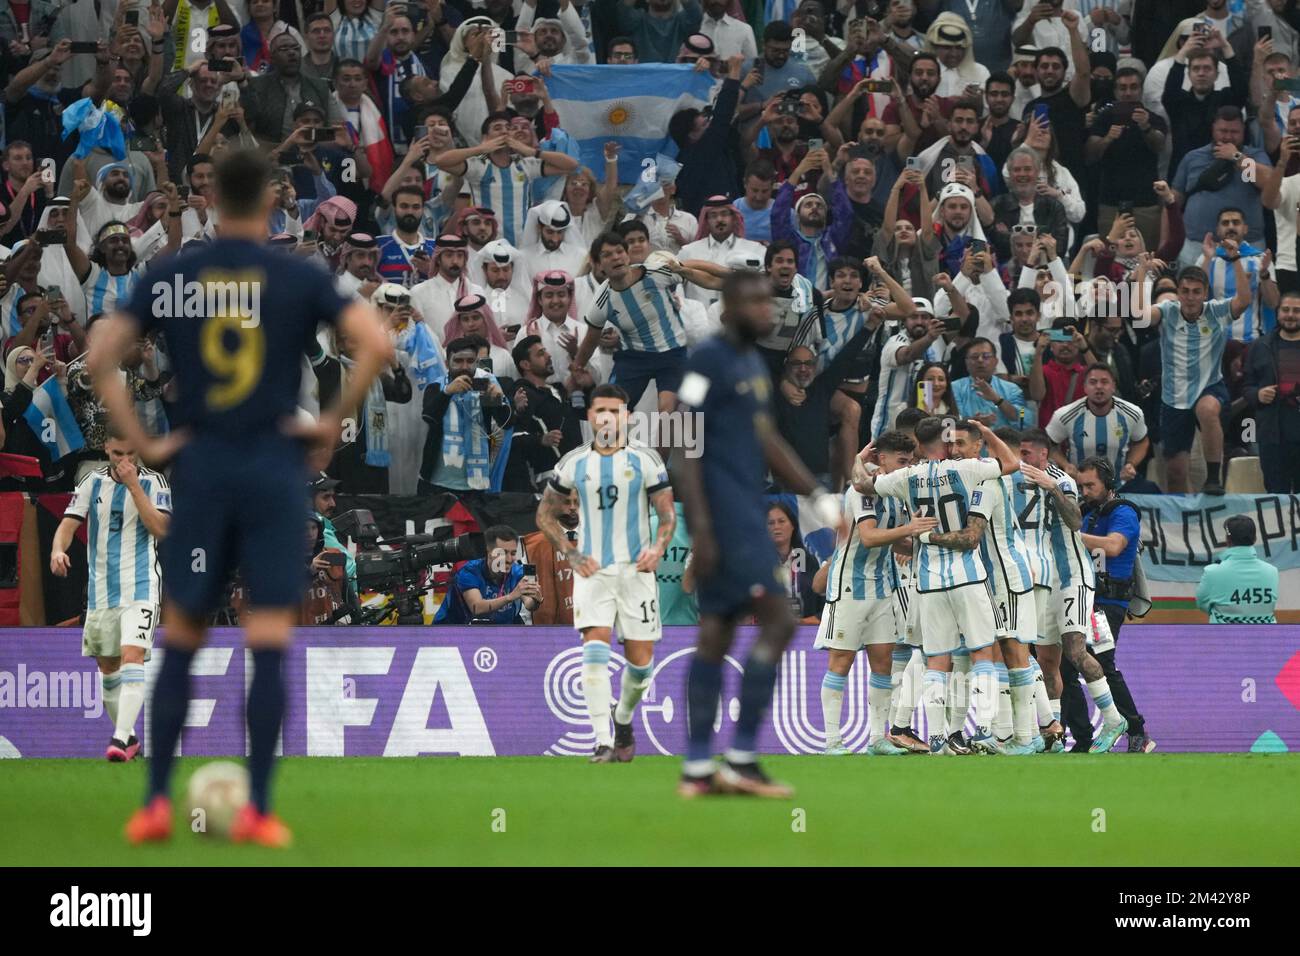 LUSAIL, QATAR - DECEMBER 18: Player of Argentina Lionel Messi celebrates after scoring a goal during the FIFA World Cup Qatar 2022 Final match between Argentina and France at Lusail Stadium on December 18, 2022 in Lusail, Qatar. (Photo by Florencia Tan Jun/PxImages) Stock Photo